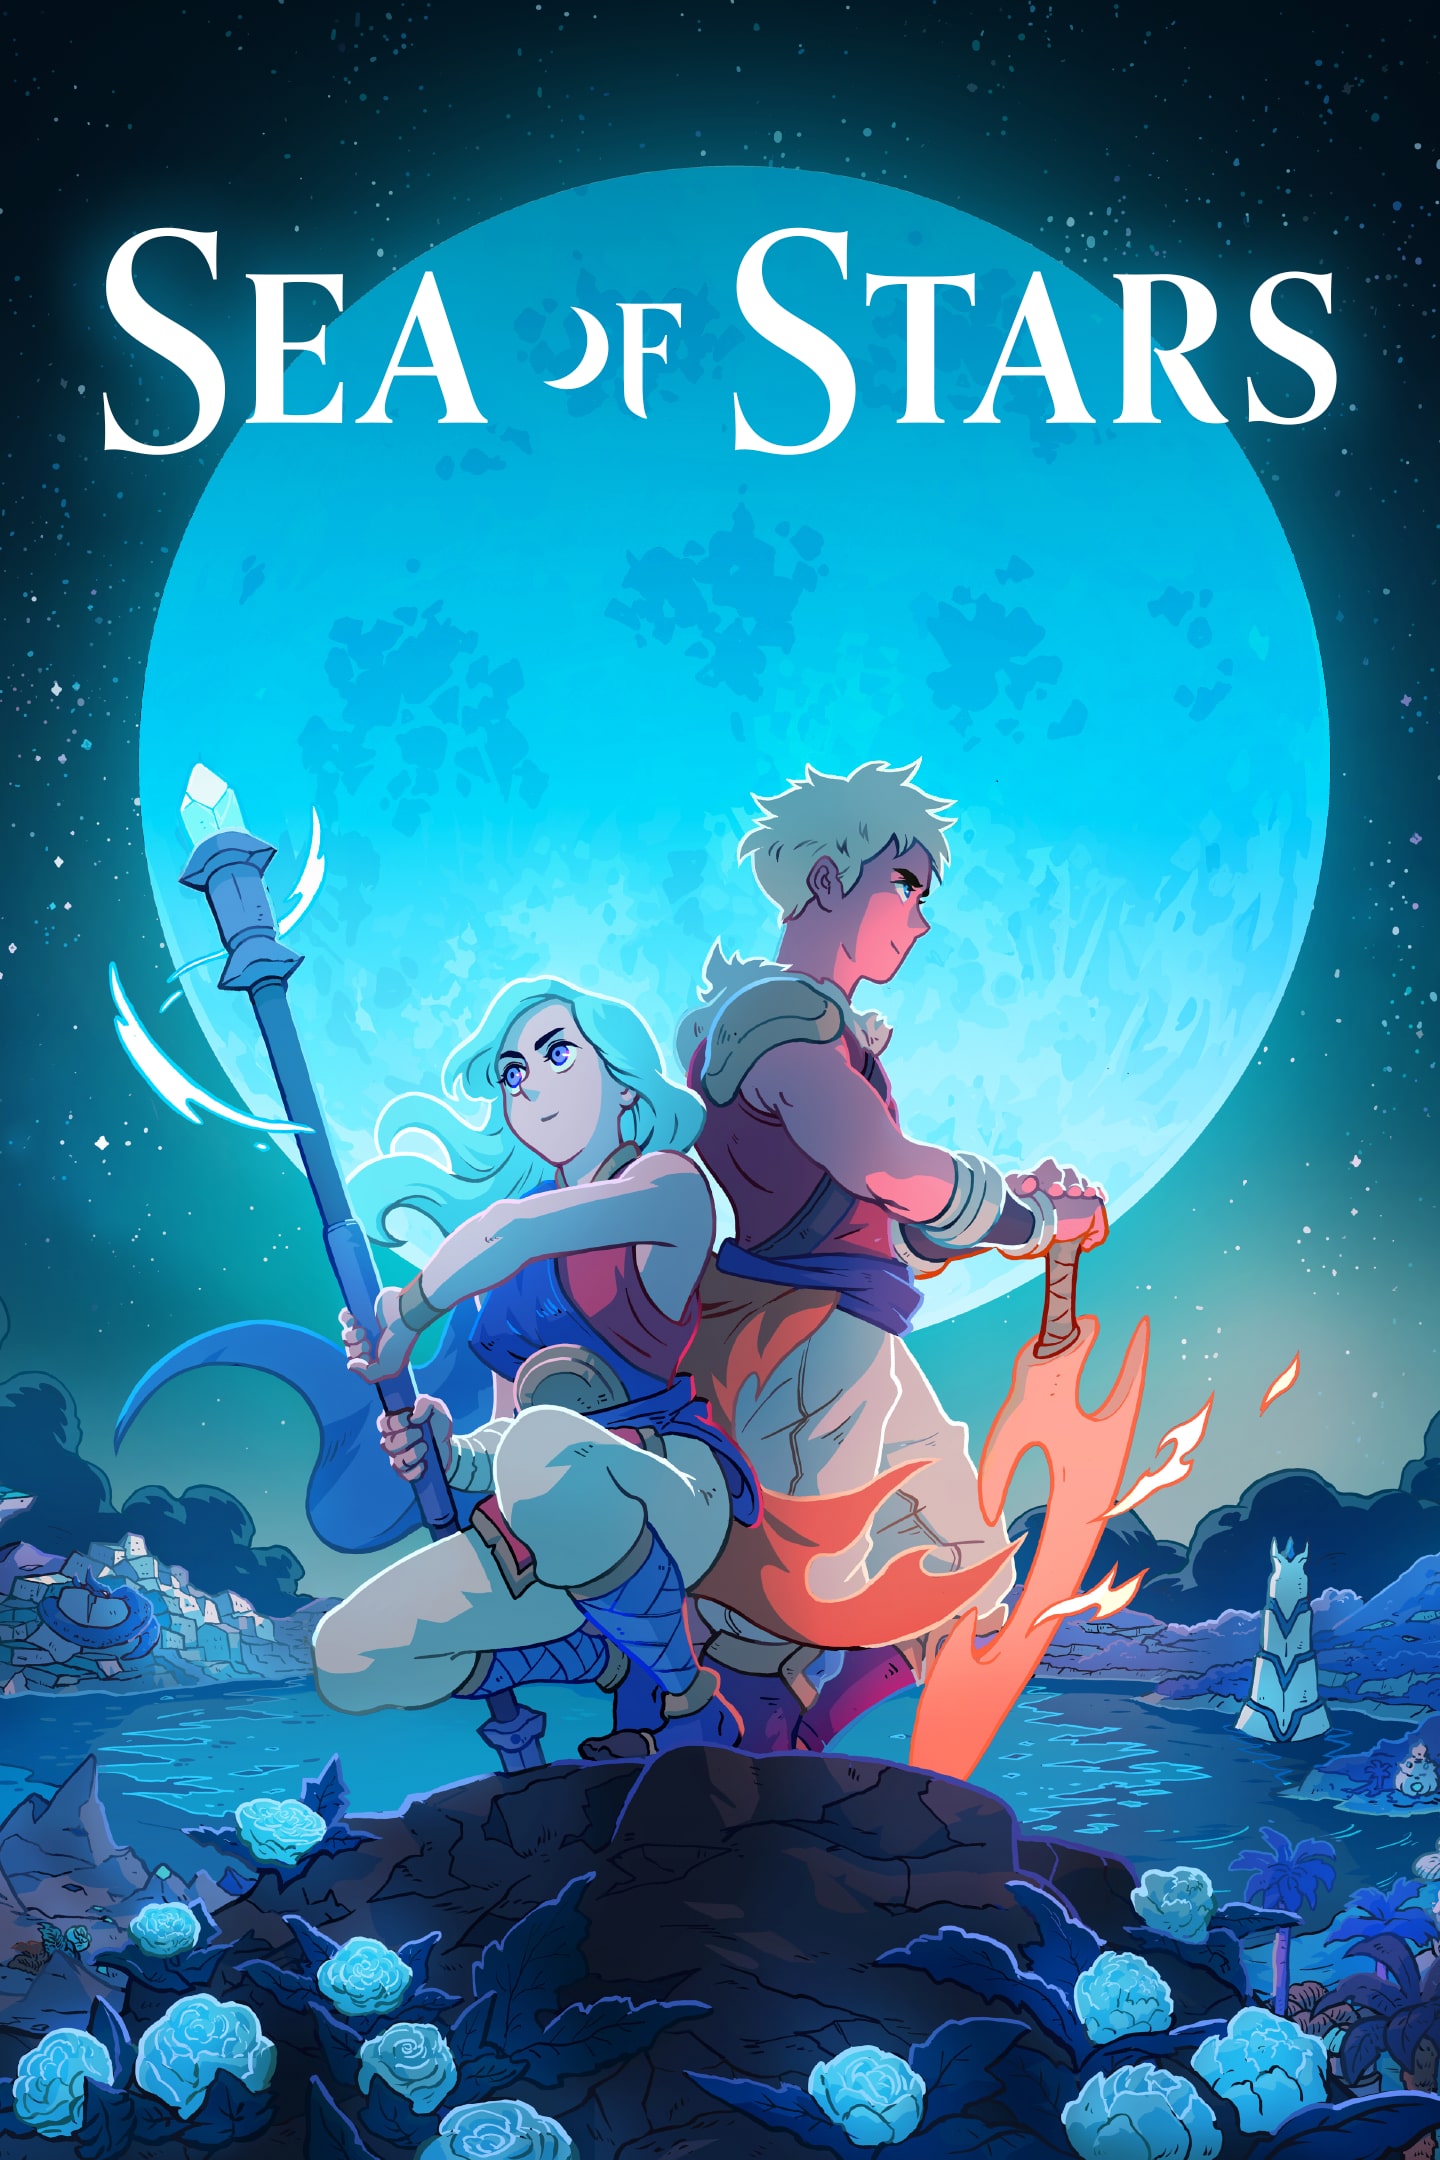 Sea of Stars is Coming to PS4 and PS5, Combat System Detailed